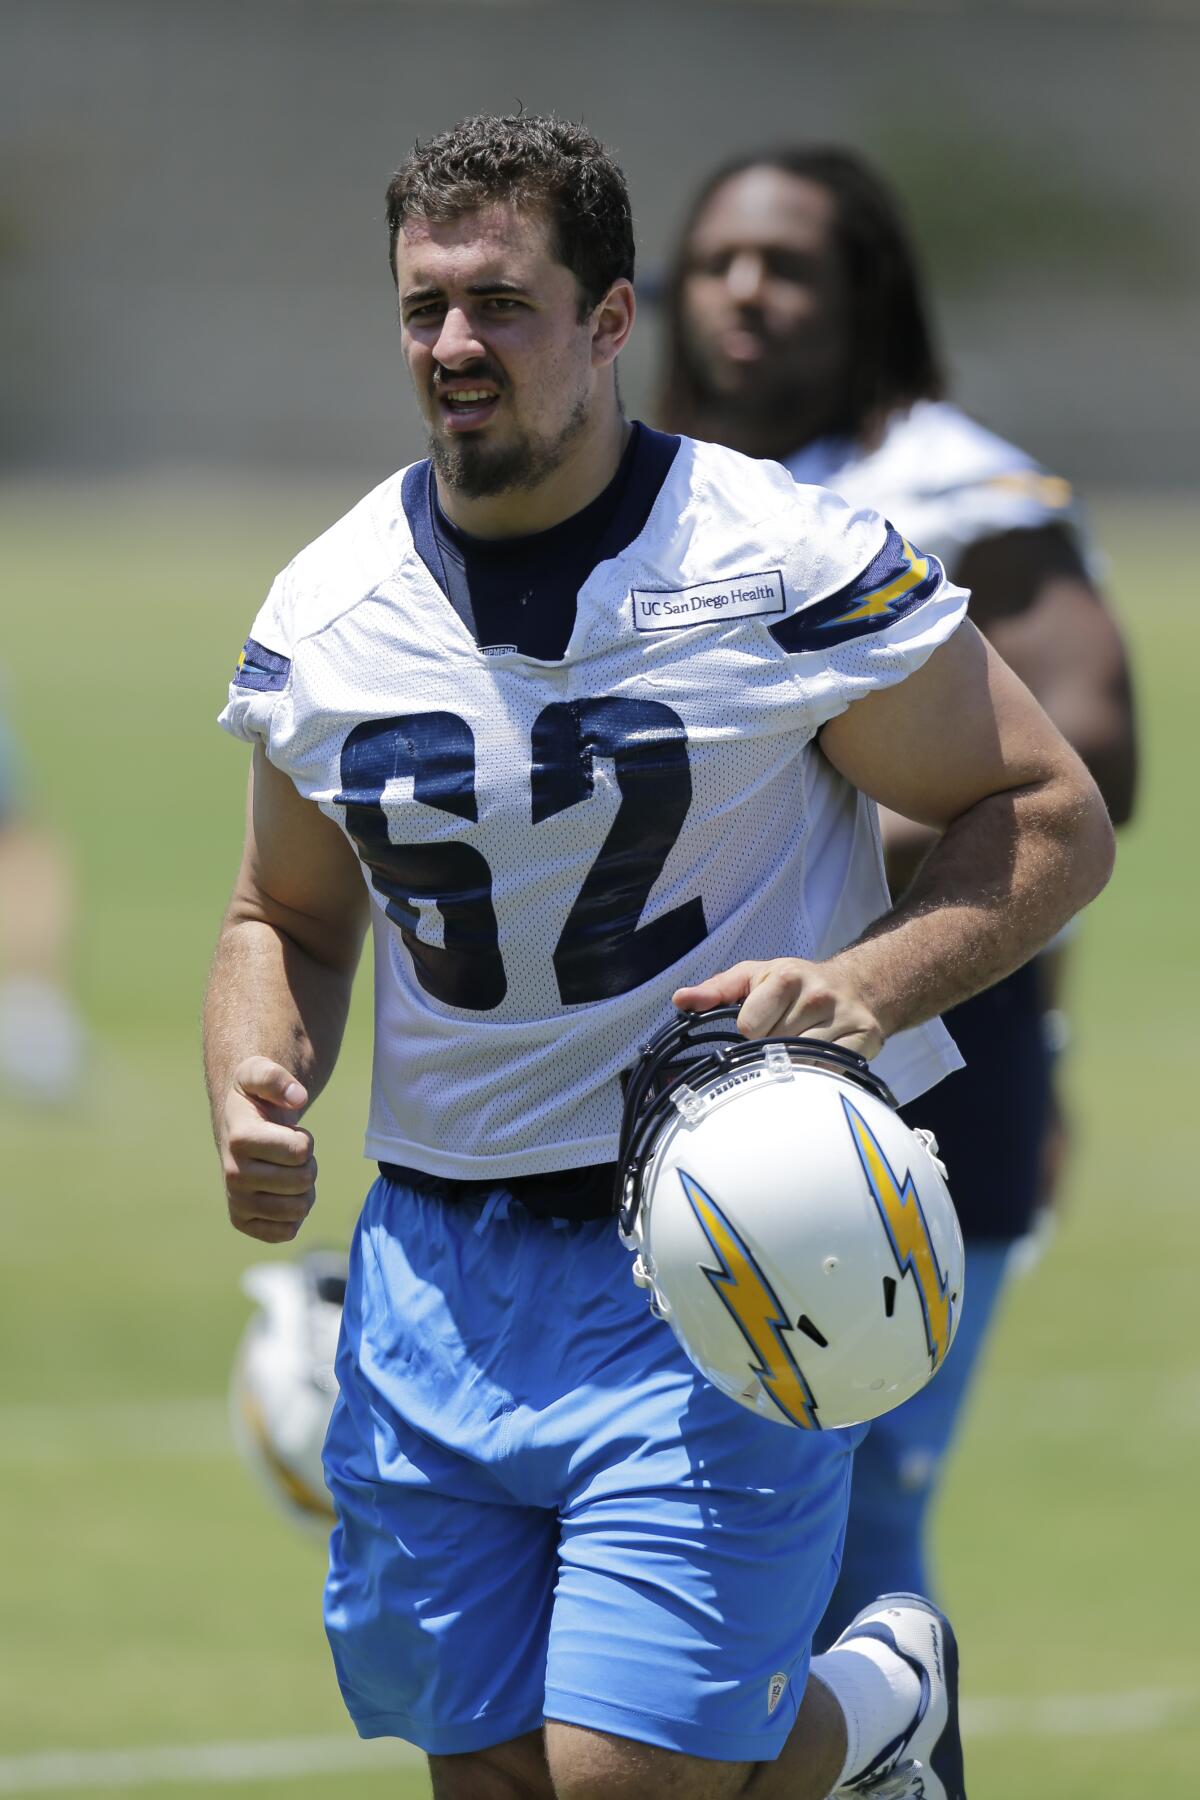 Chargers' center Max Tuerk trains during rookie training camp on May 13, 2016, in San Diego.